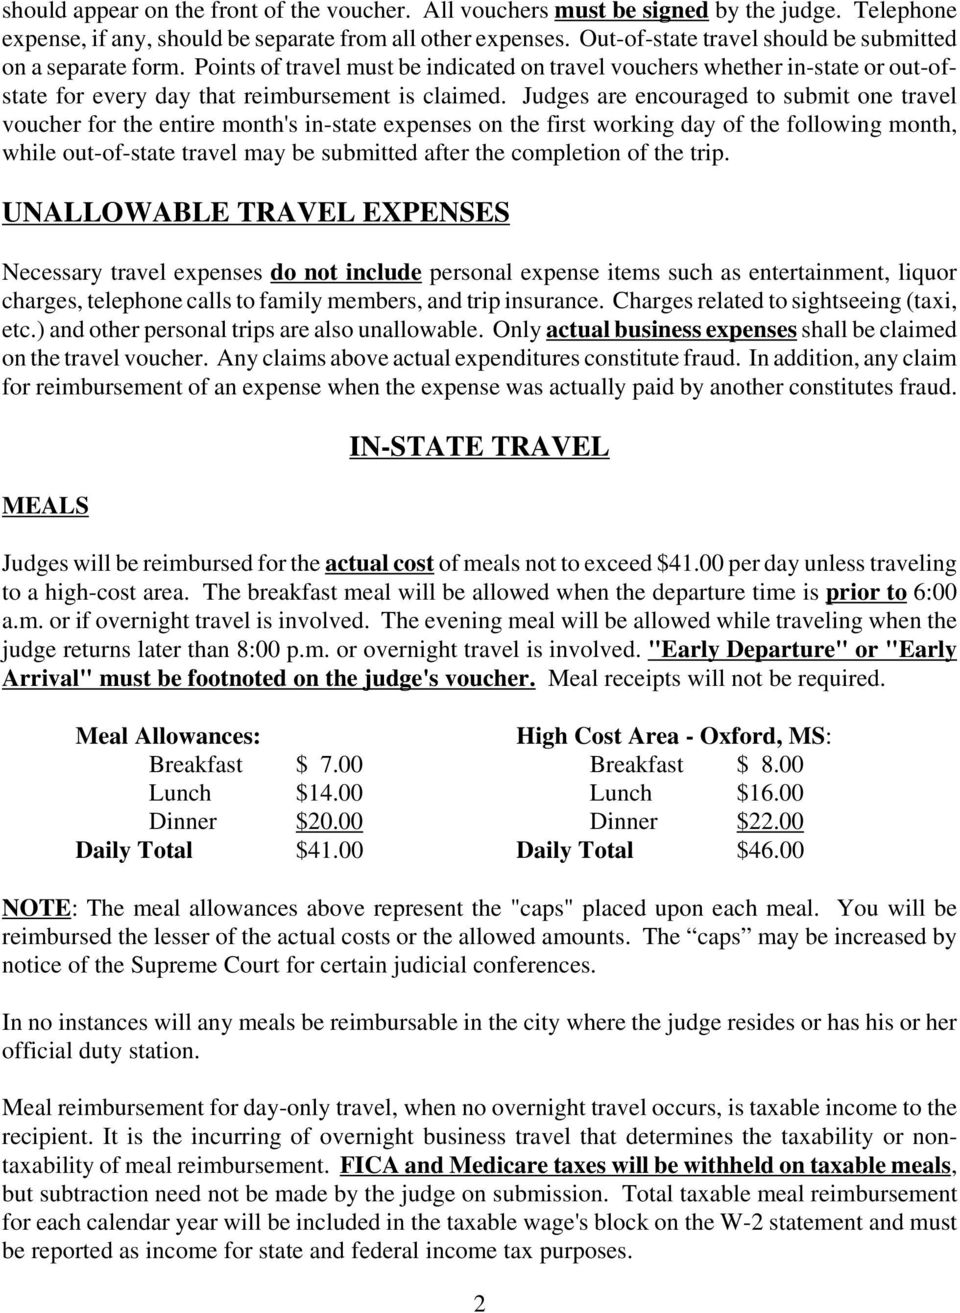 Judges are encouraged to submit one travel voucher for the entire month's in-state expenses on the first working day of the following month, while out-of-state travel may be submitted after the